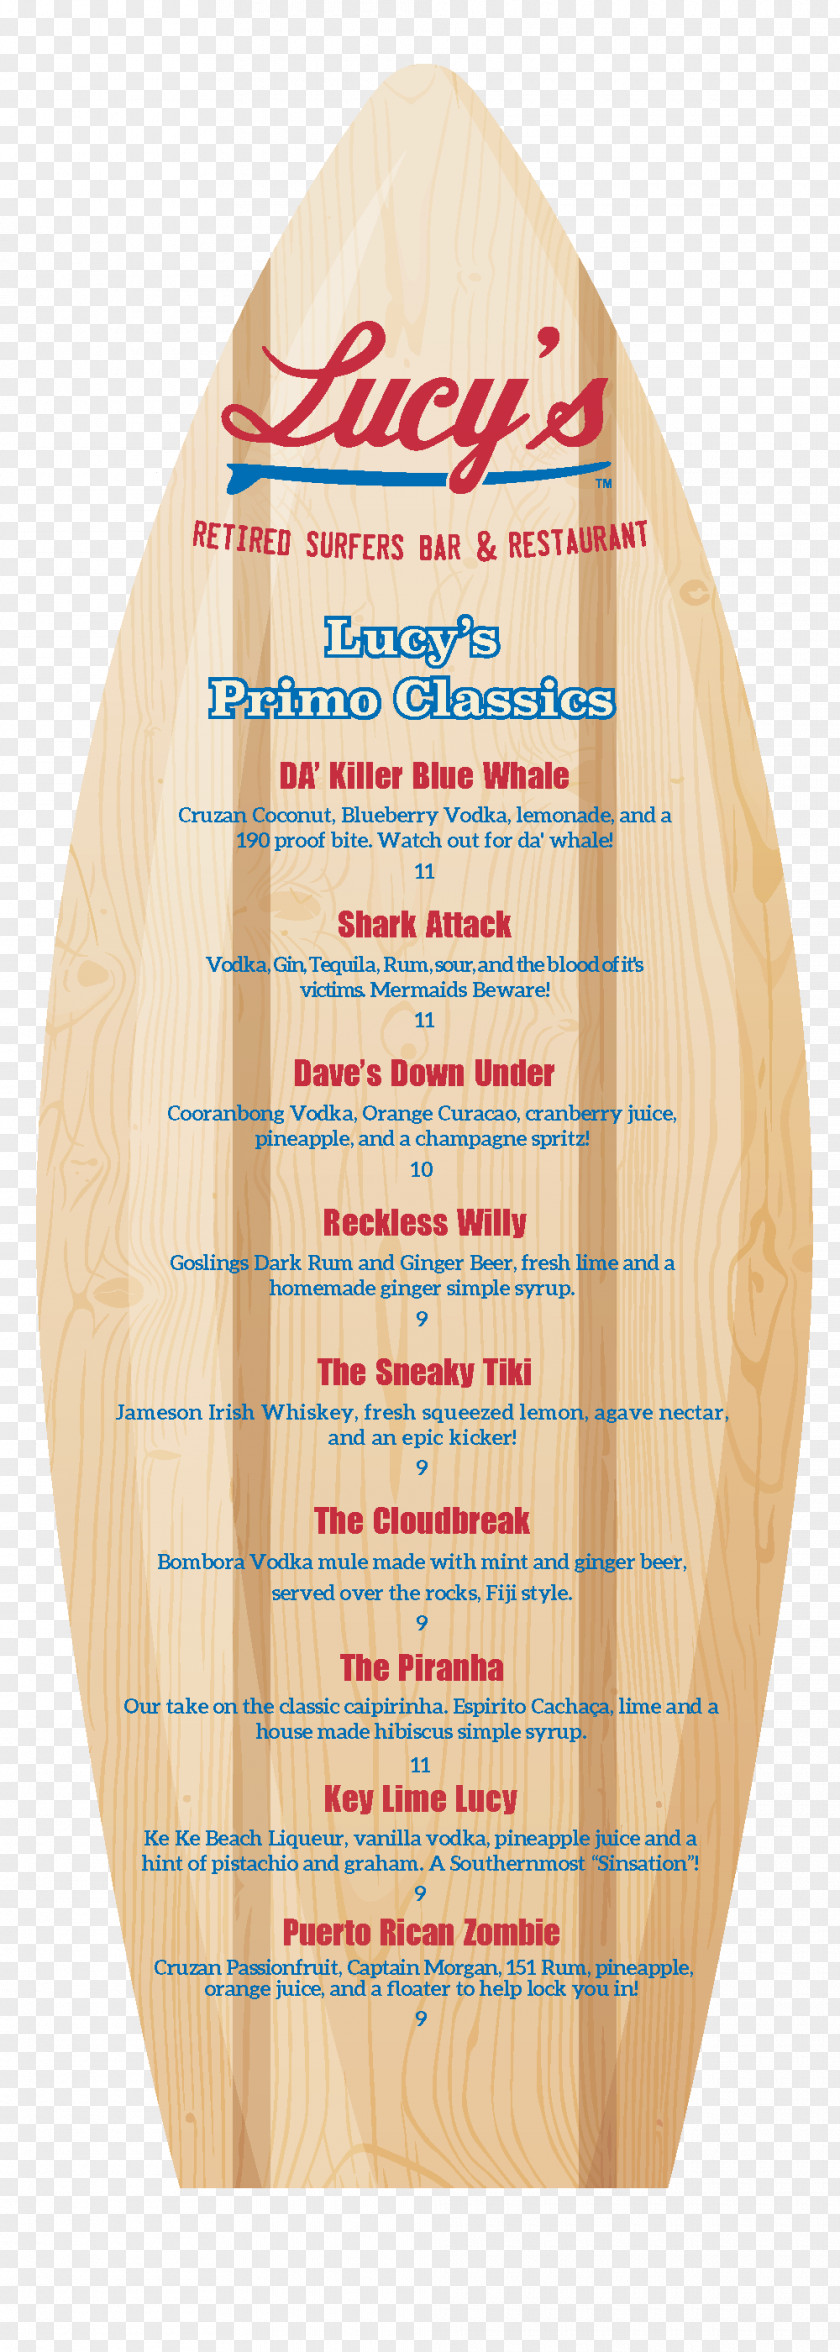 Menu Lucy's Retired Surfers Bar & Restaurant Drink PNG